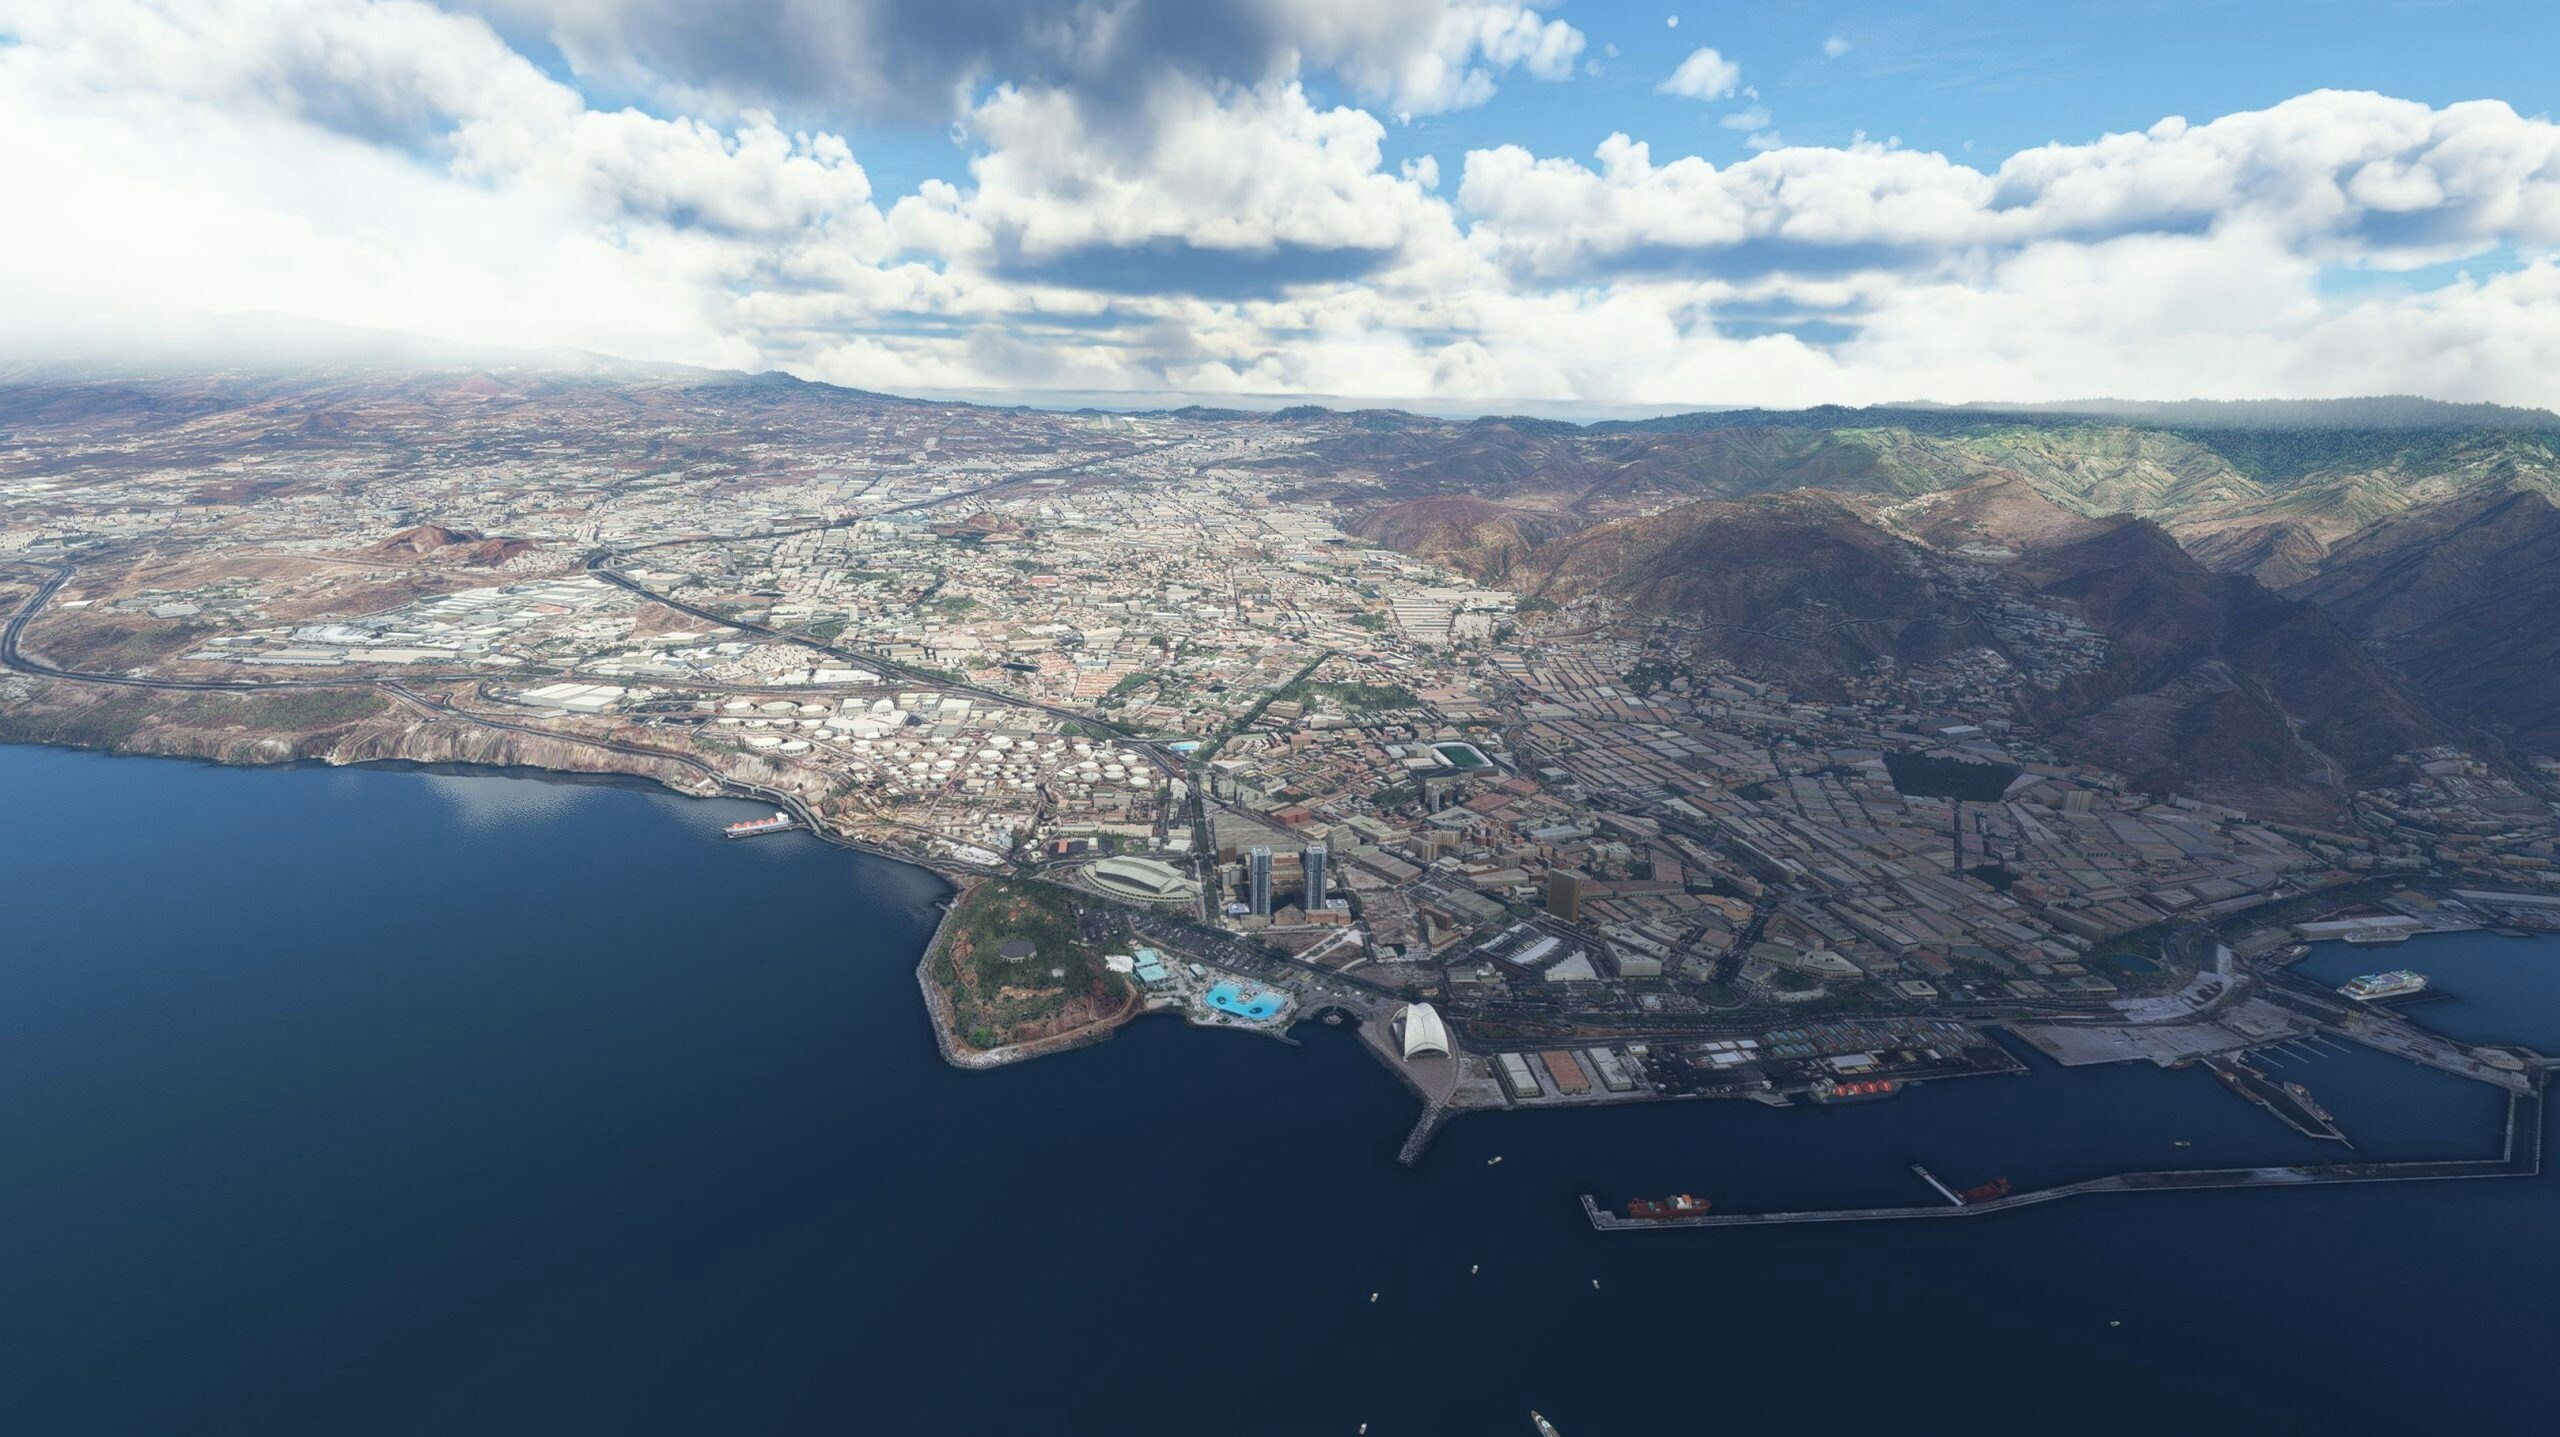 MK-Studios Releases Tenerife Airports for MSFS